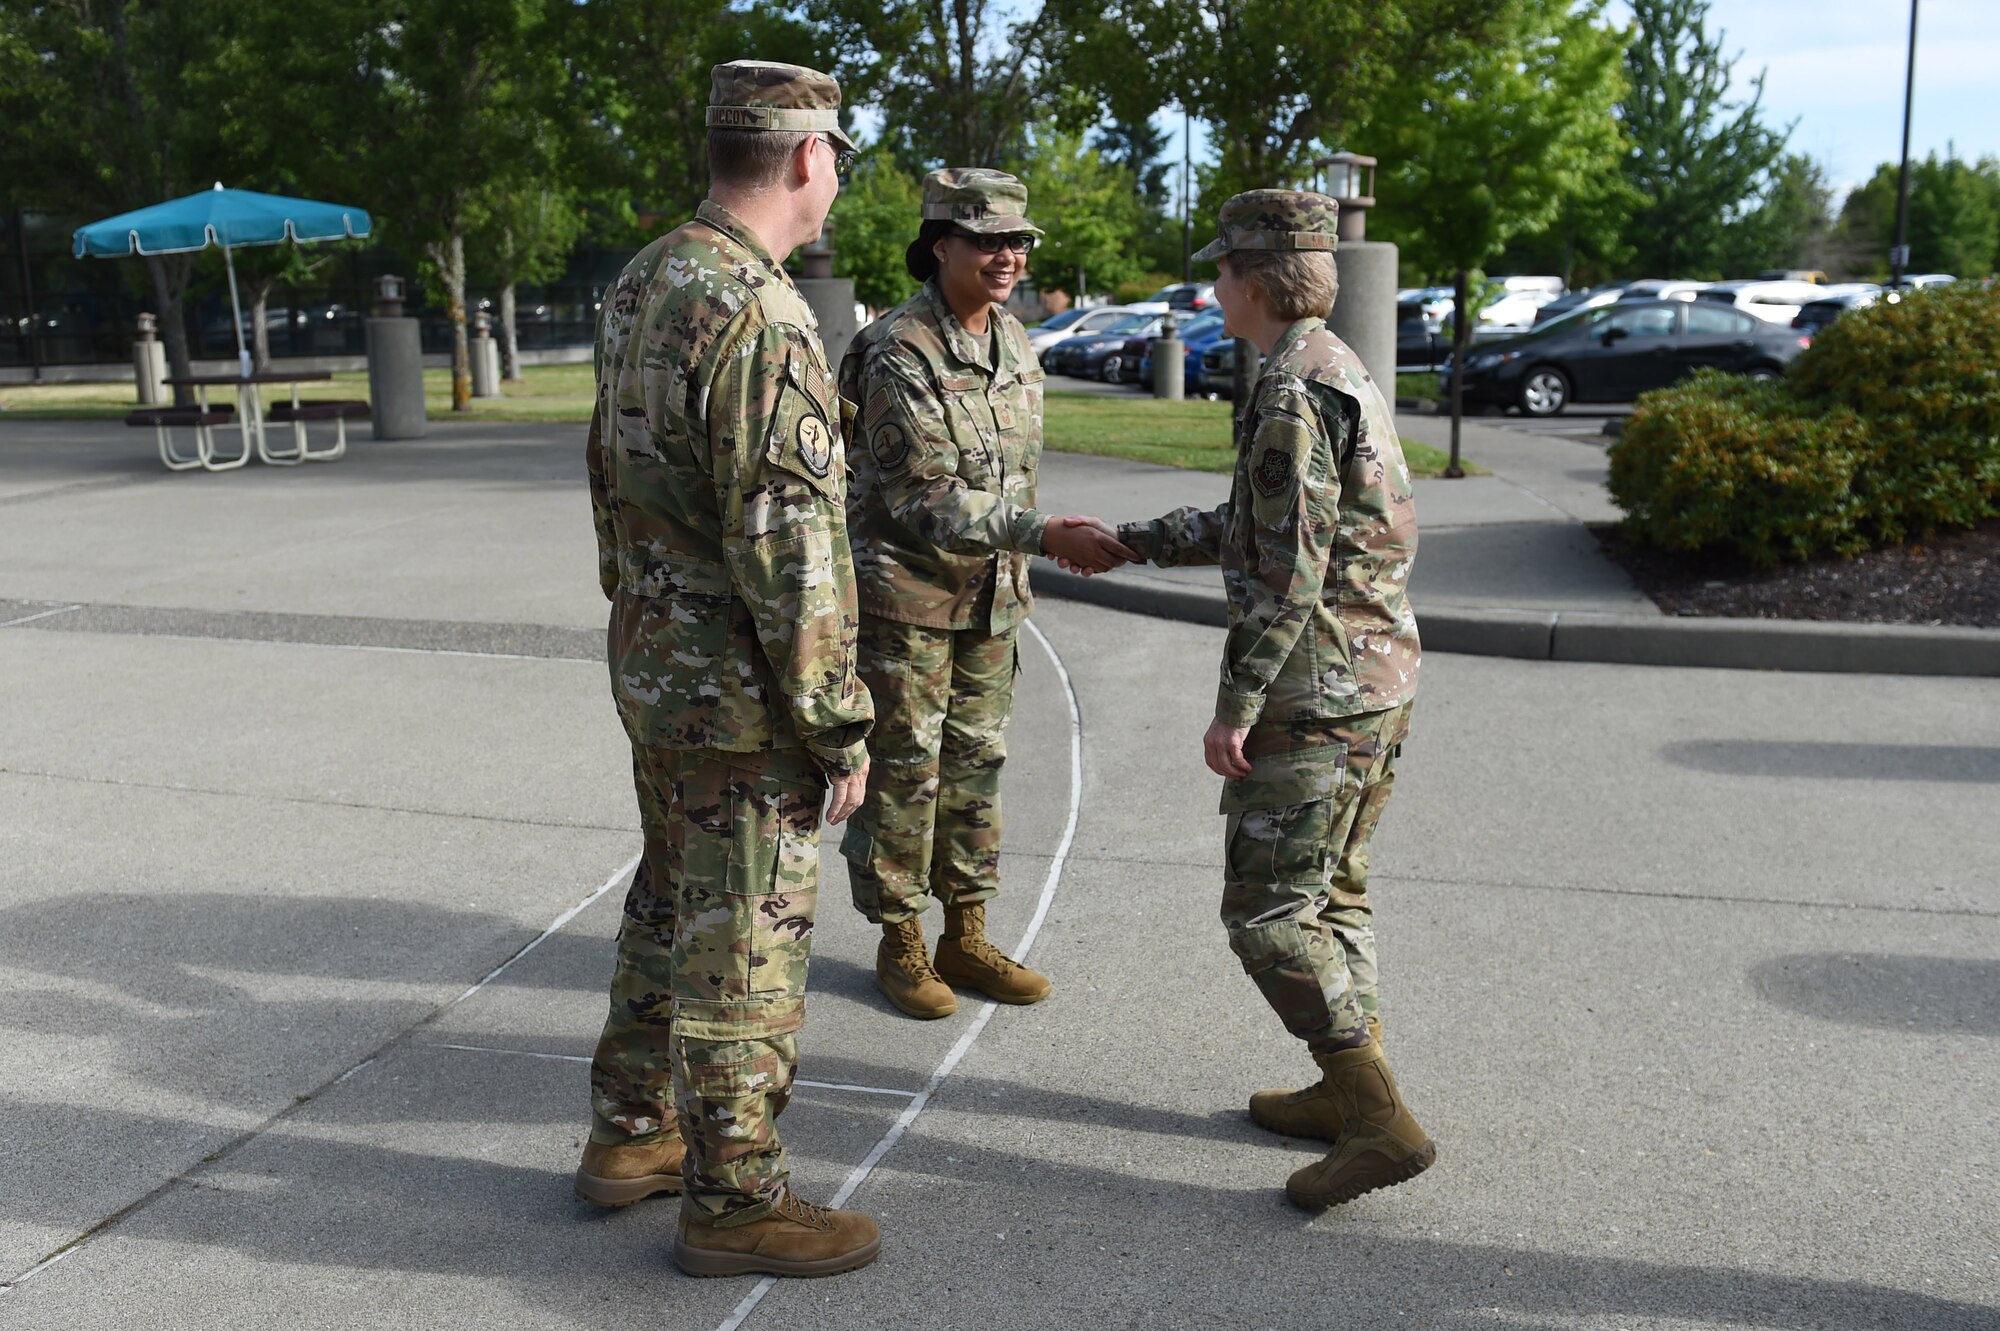 Col. Robert McCoy, 62nd Medical Squadron commander, and Senior Master Sgt. Michelle Joseph, 62nd MDS superintendent, greet Gen. Maryanne Miller, Air Mobility Command commander, June 26, 2019, in front of the 62nd MDS on Joint Base Lewis-McChord, Wash.